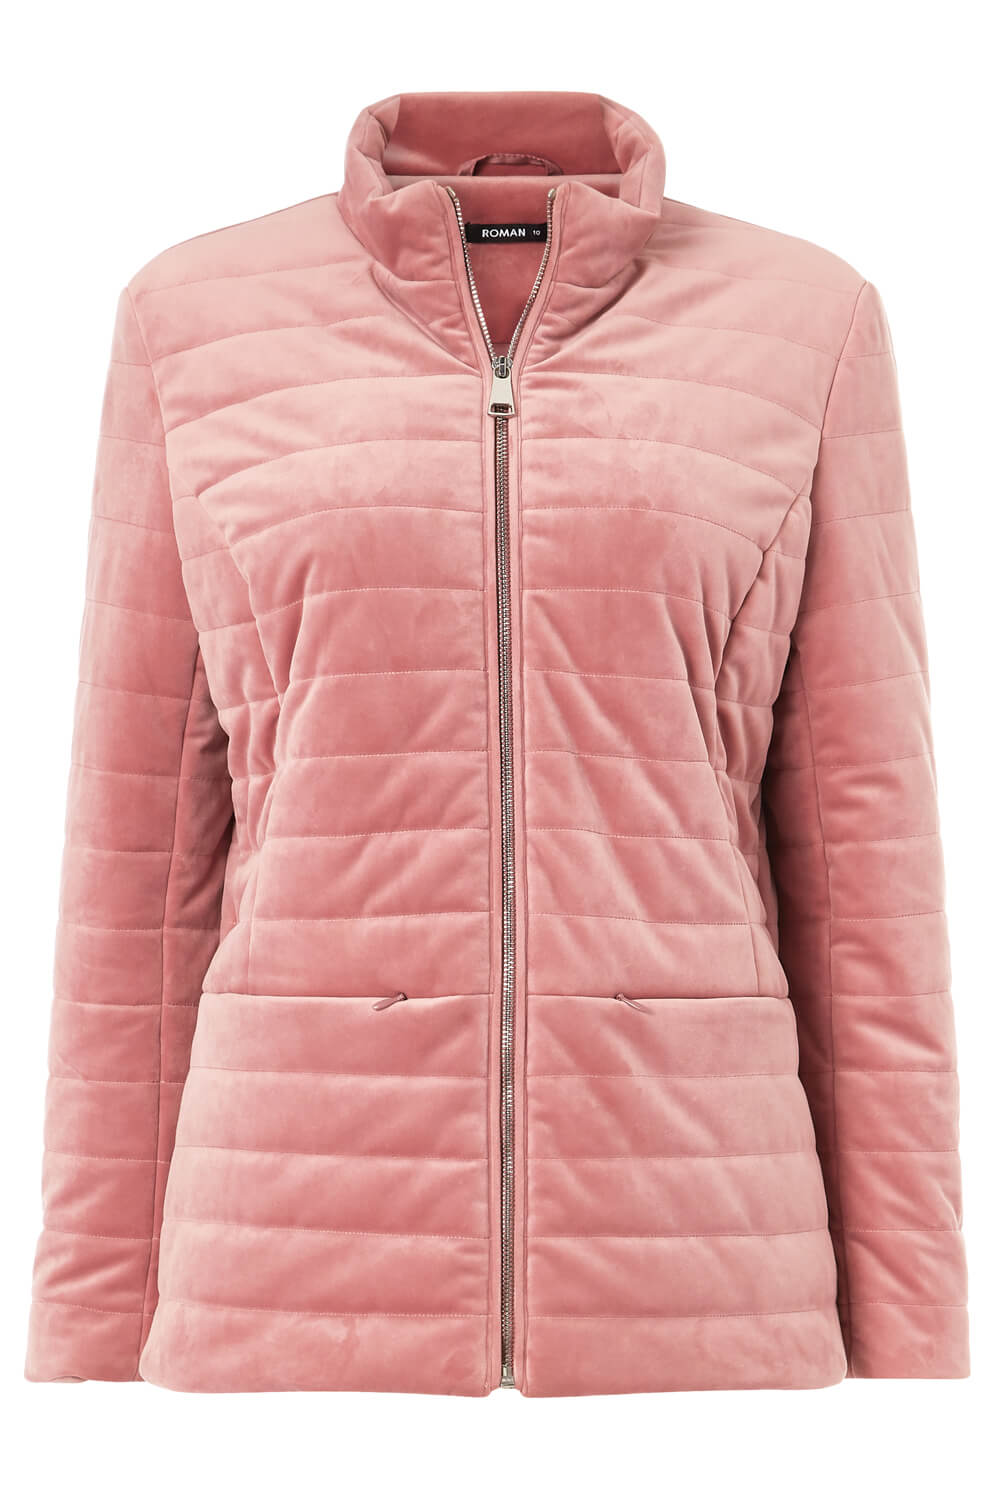 PINK Velour Texture Quilted Jacket, Image 5 of 5